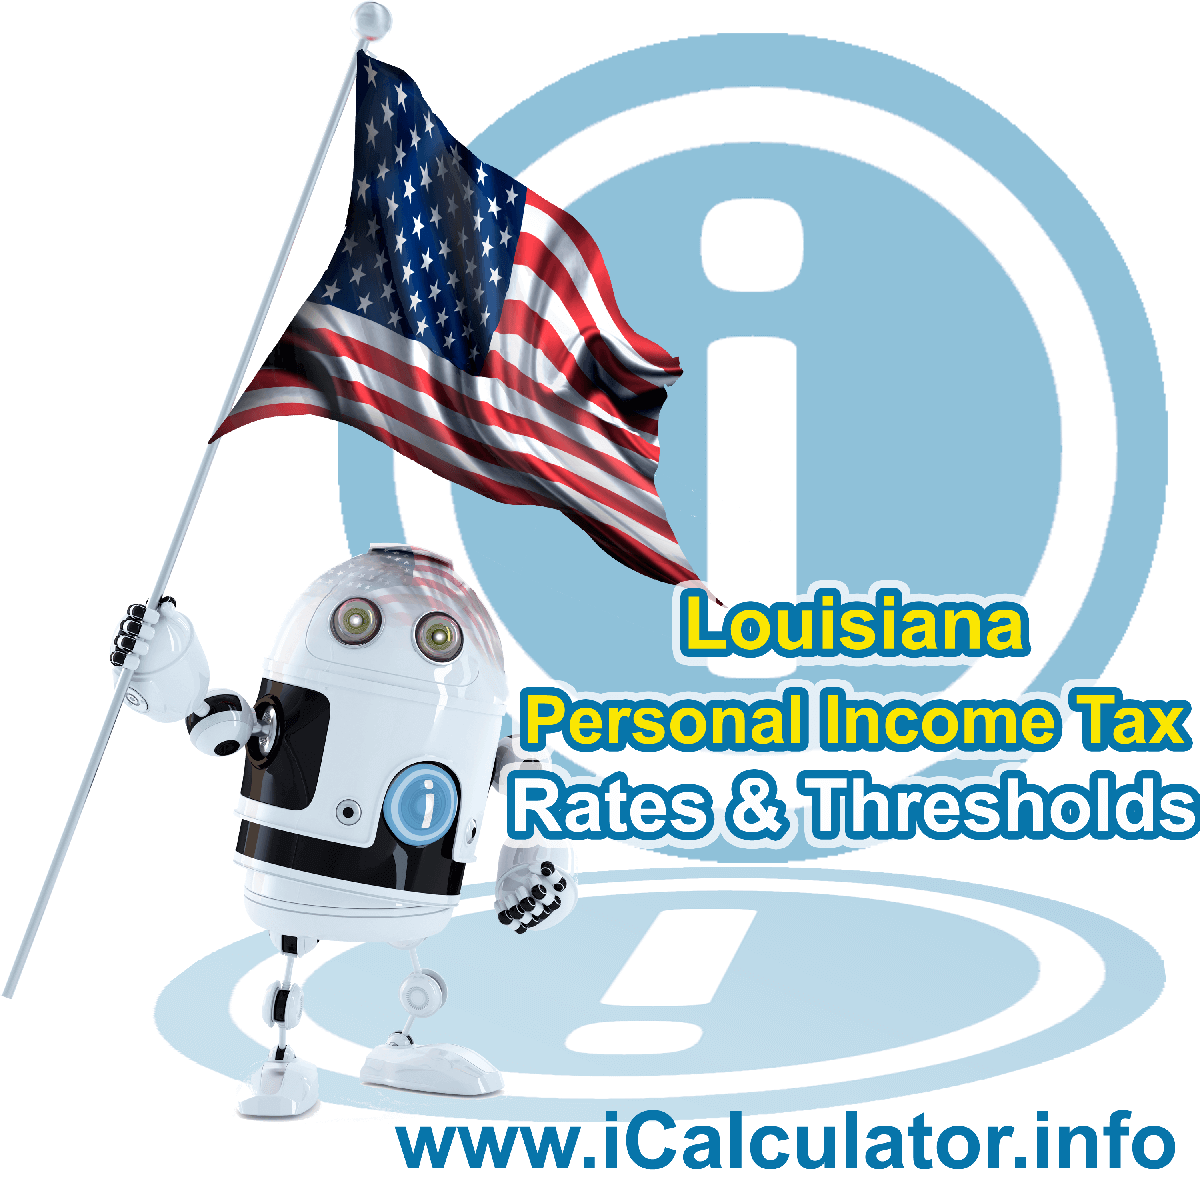 Louisiana State Tax Tables 2022. This image displays details of the Louisiana State Tax Tables for the 2022 tax return year which is provided in support of the 2022 US Tax Calculator